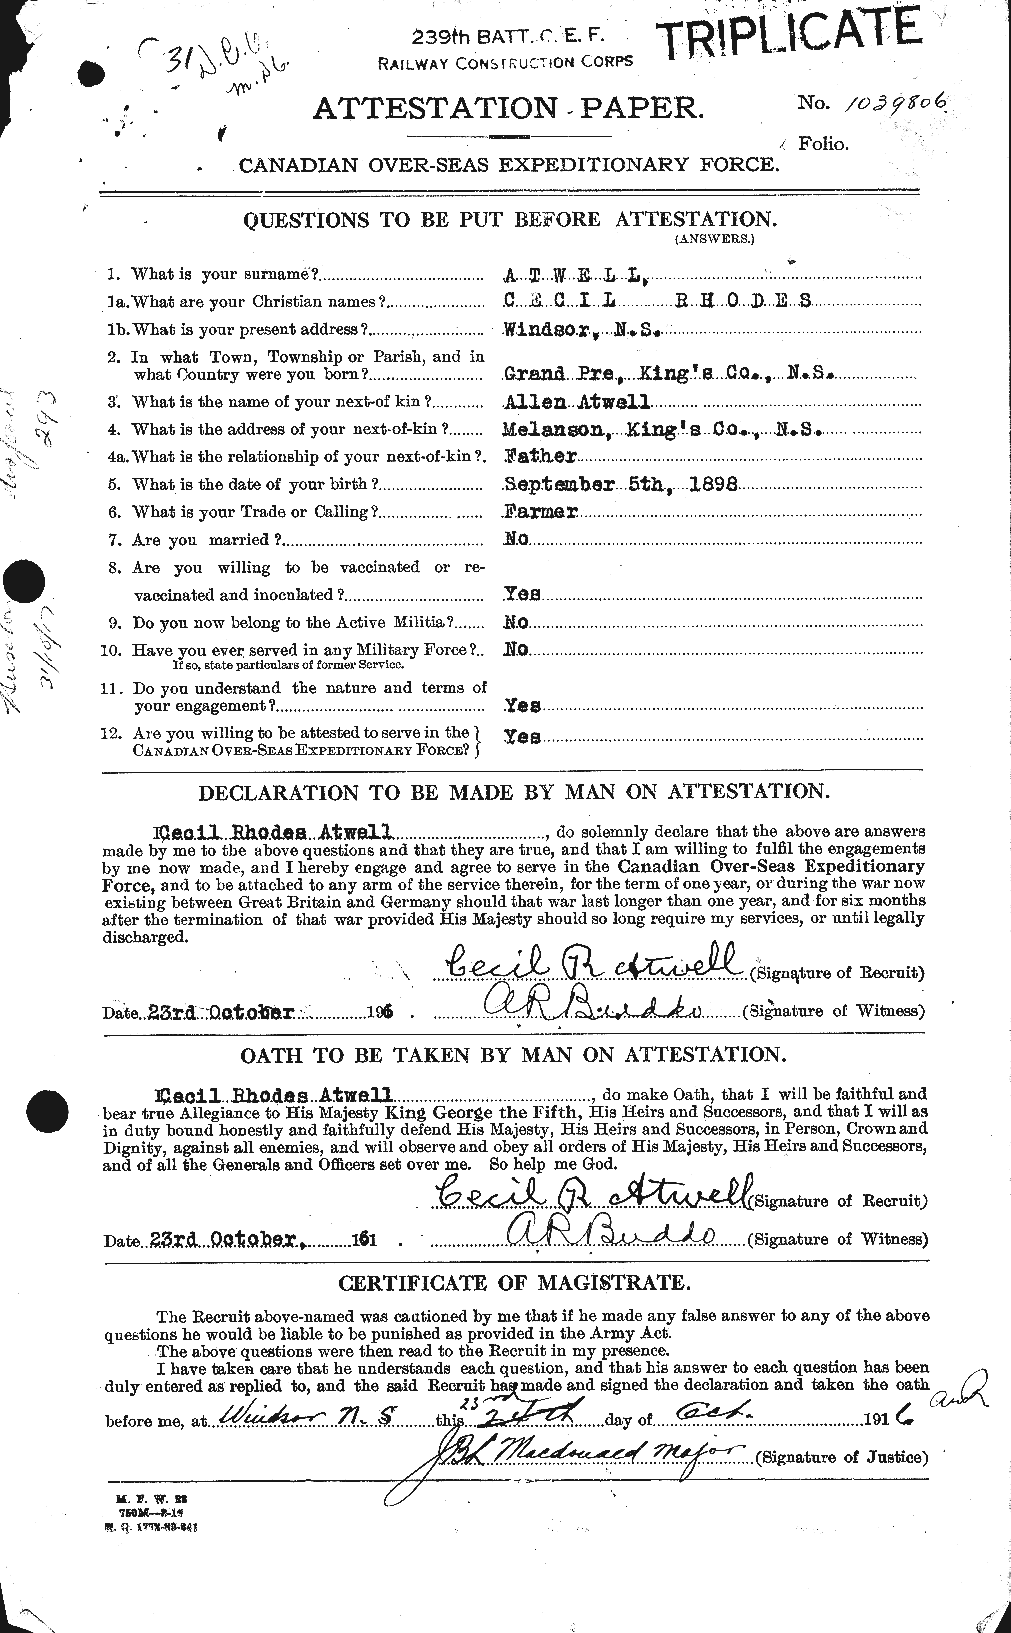 Personnel Records of the First World War - CEF 223983a